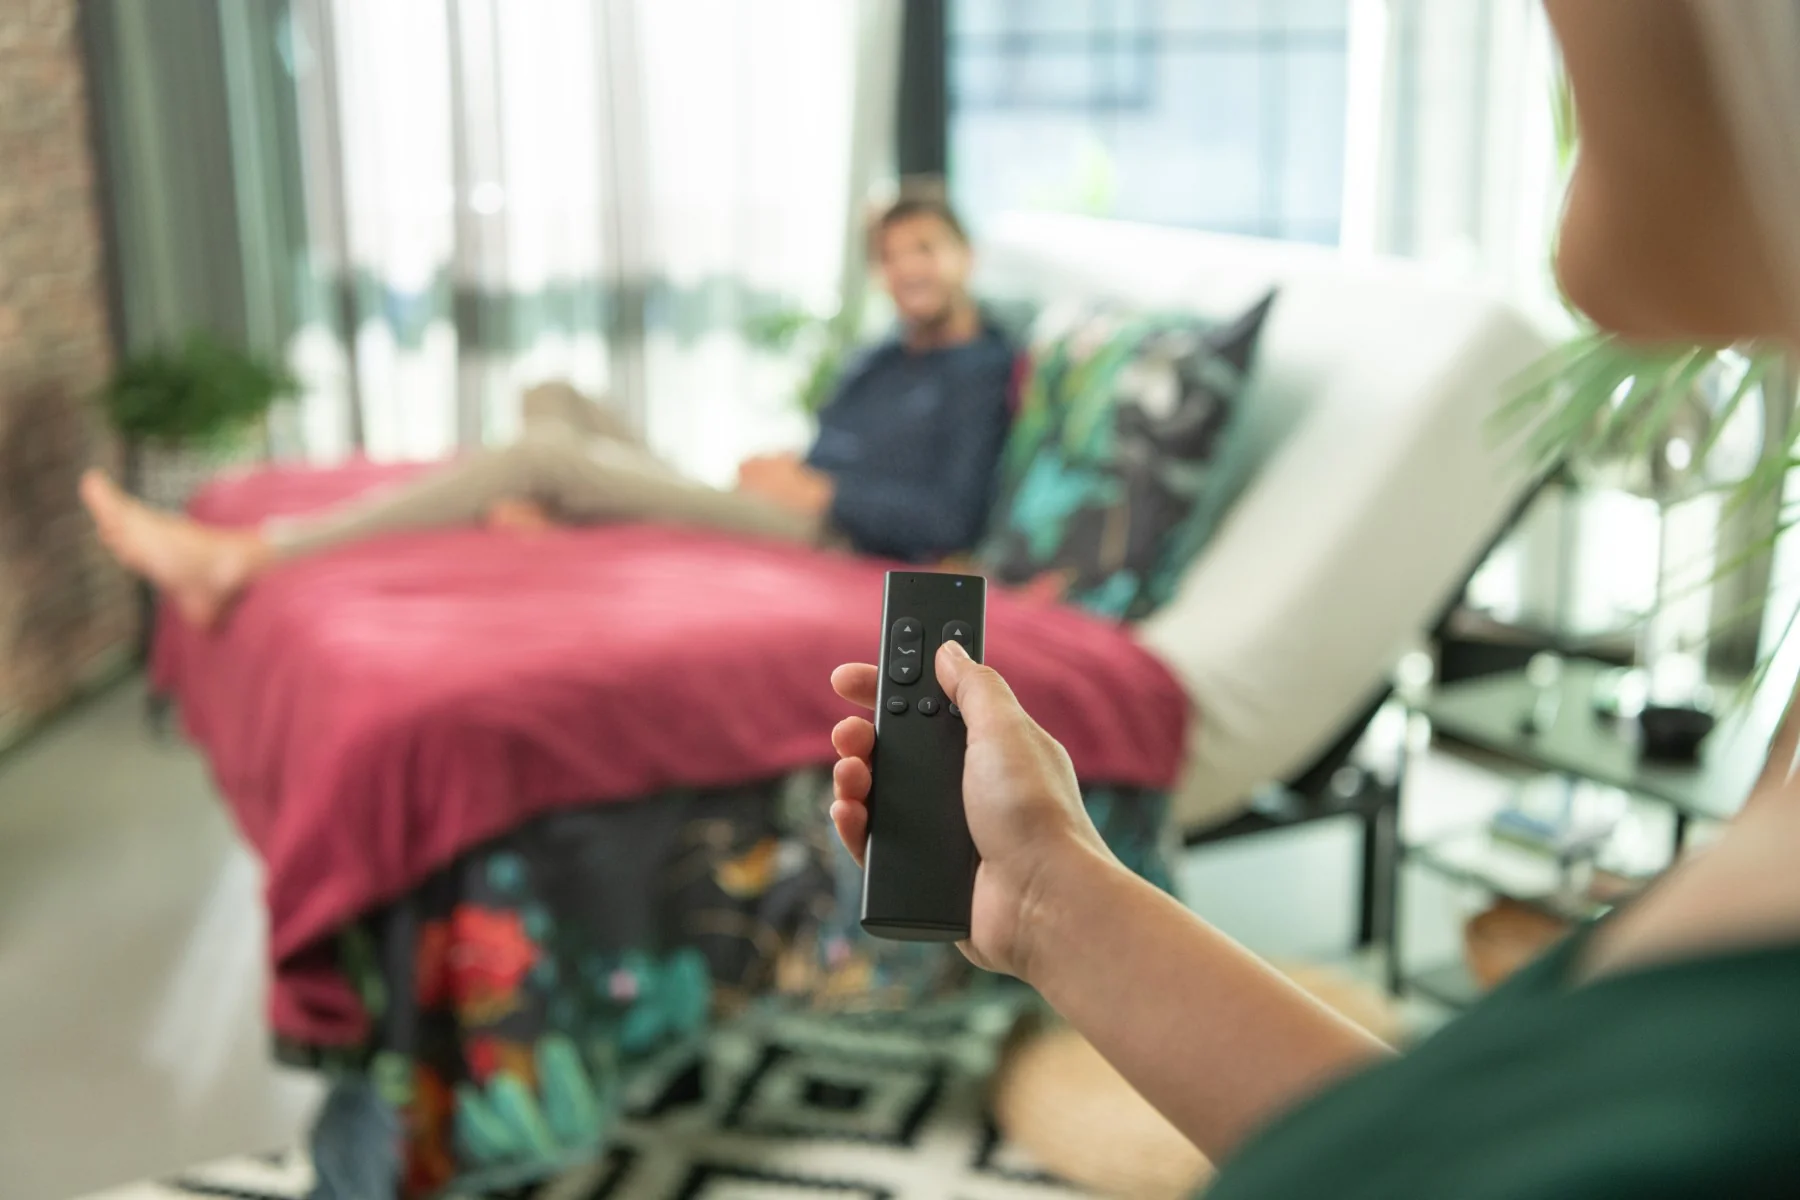 A person holding a remote control with another person lounging in the background on a bed.